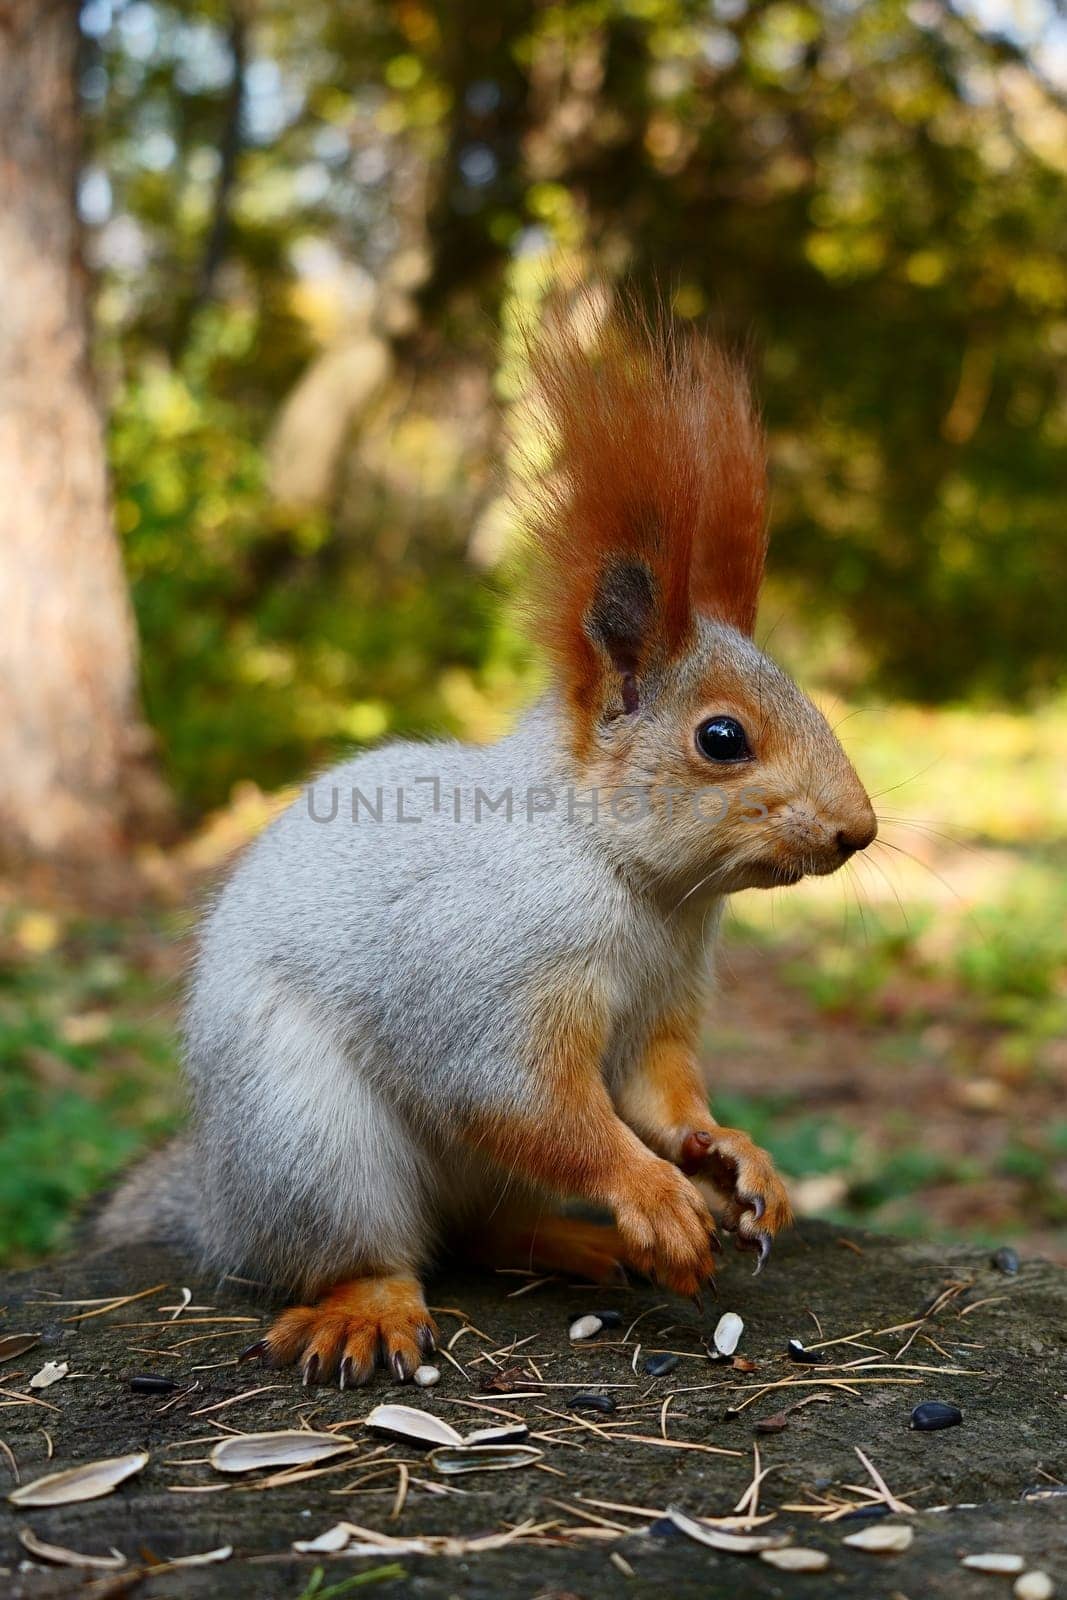 A squirrel sits on the ground in an autumn park. Side view by tewolf